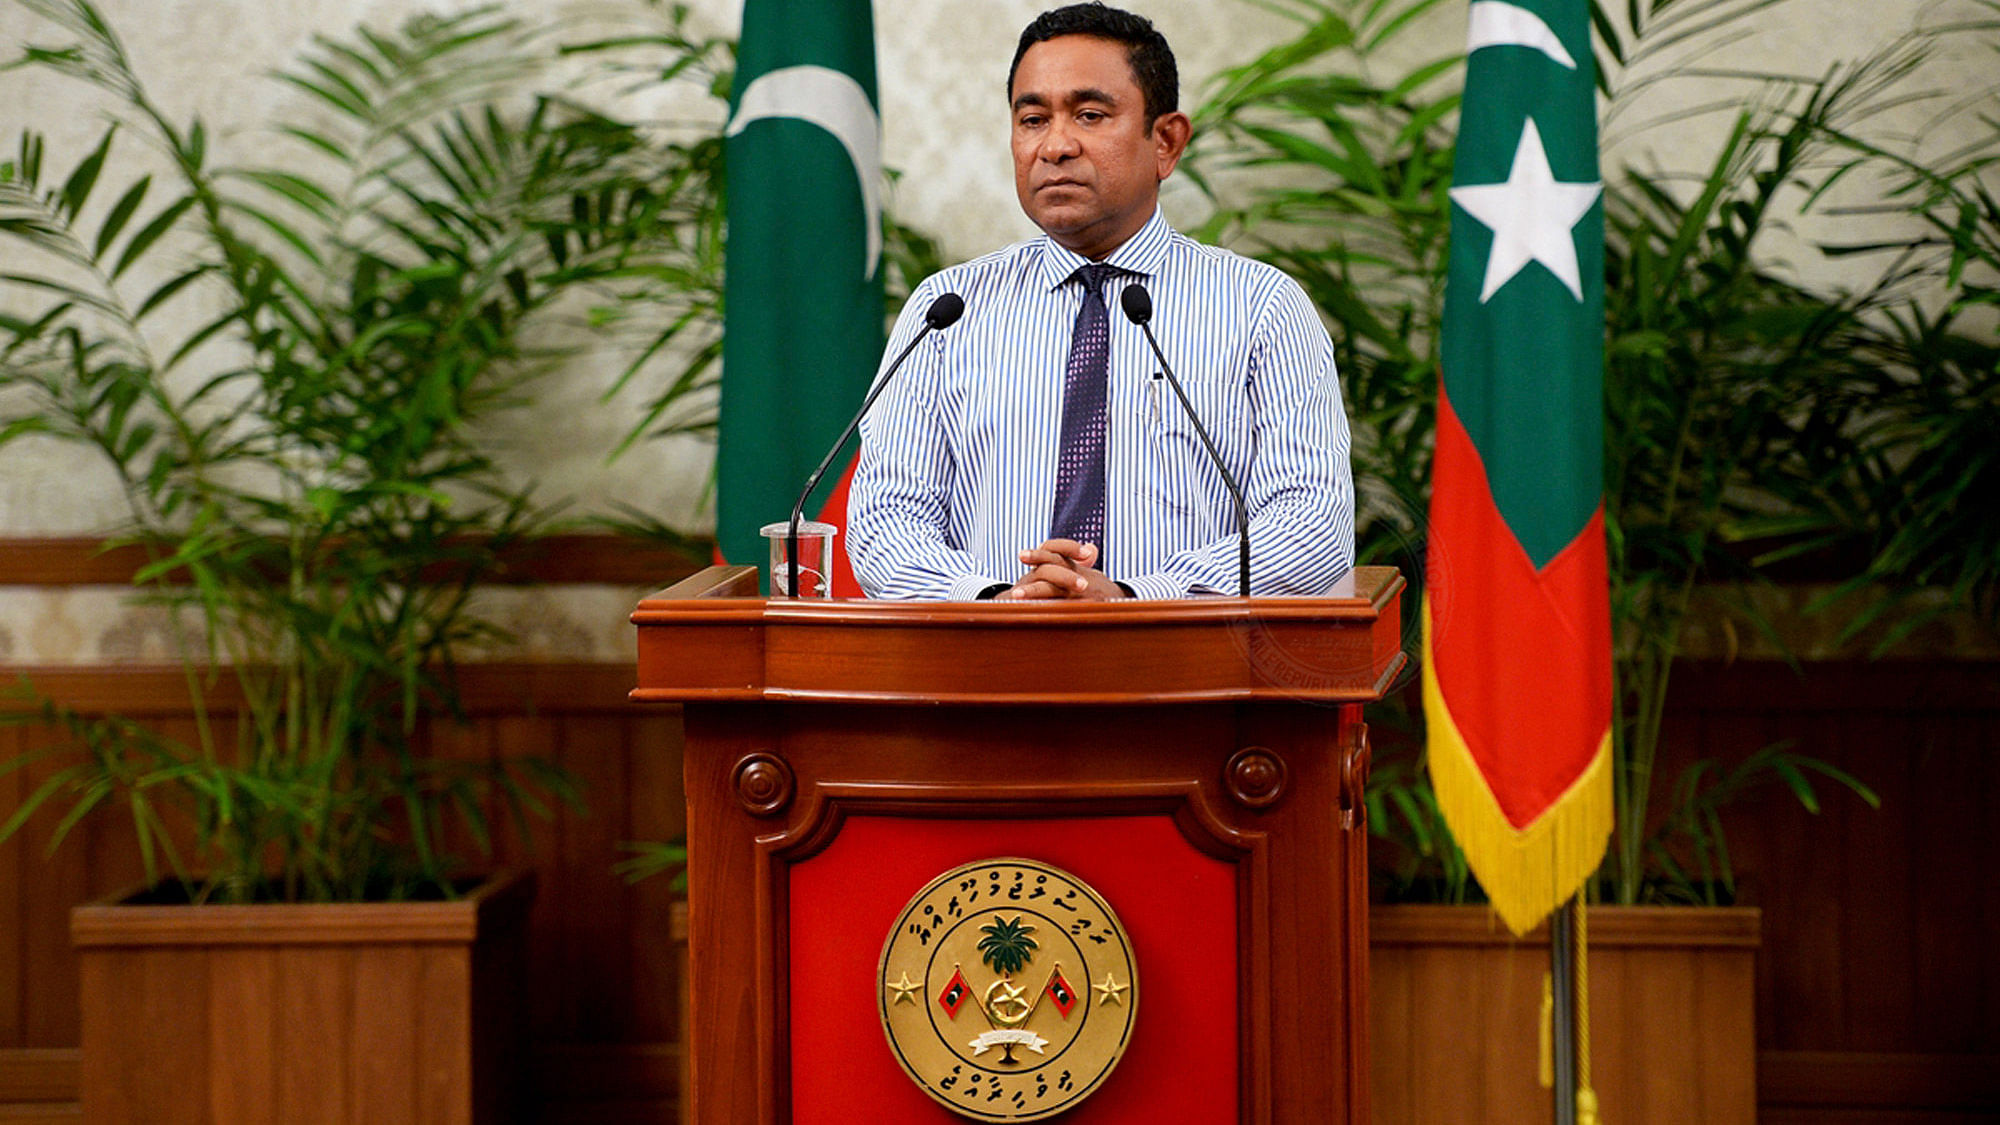 Maldives President Yameen Abdul Gayoom addressing the nation in Male, Maldives, October 25, 2015. (Photo: AP)